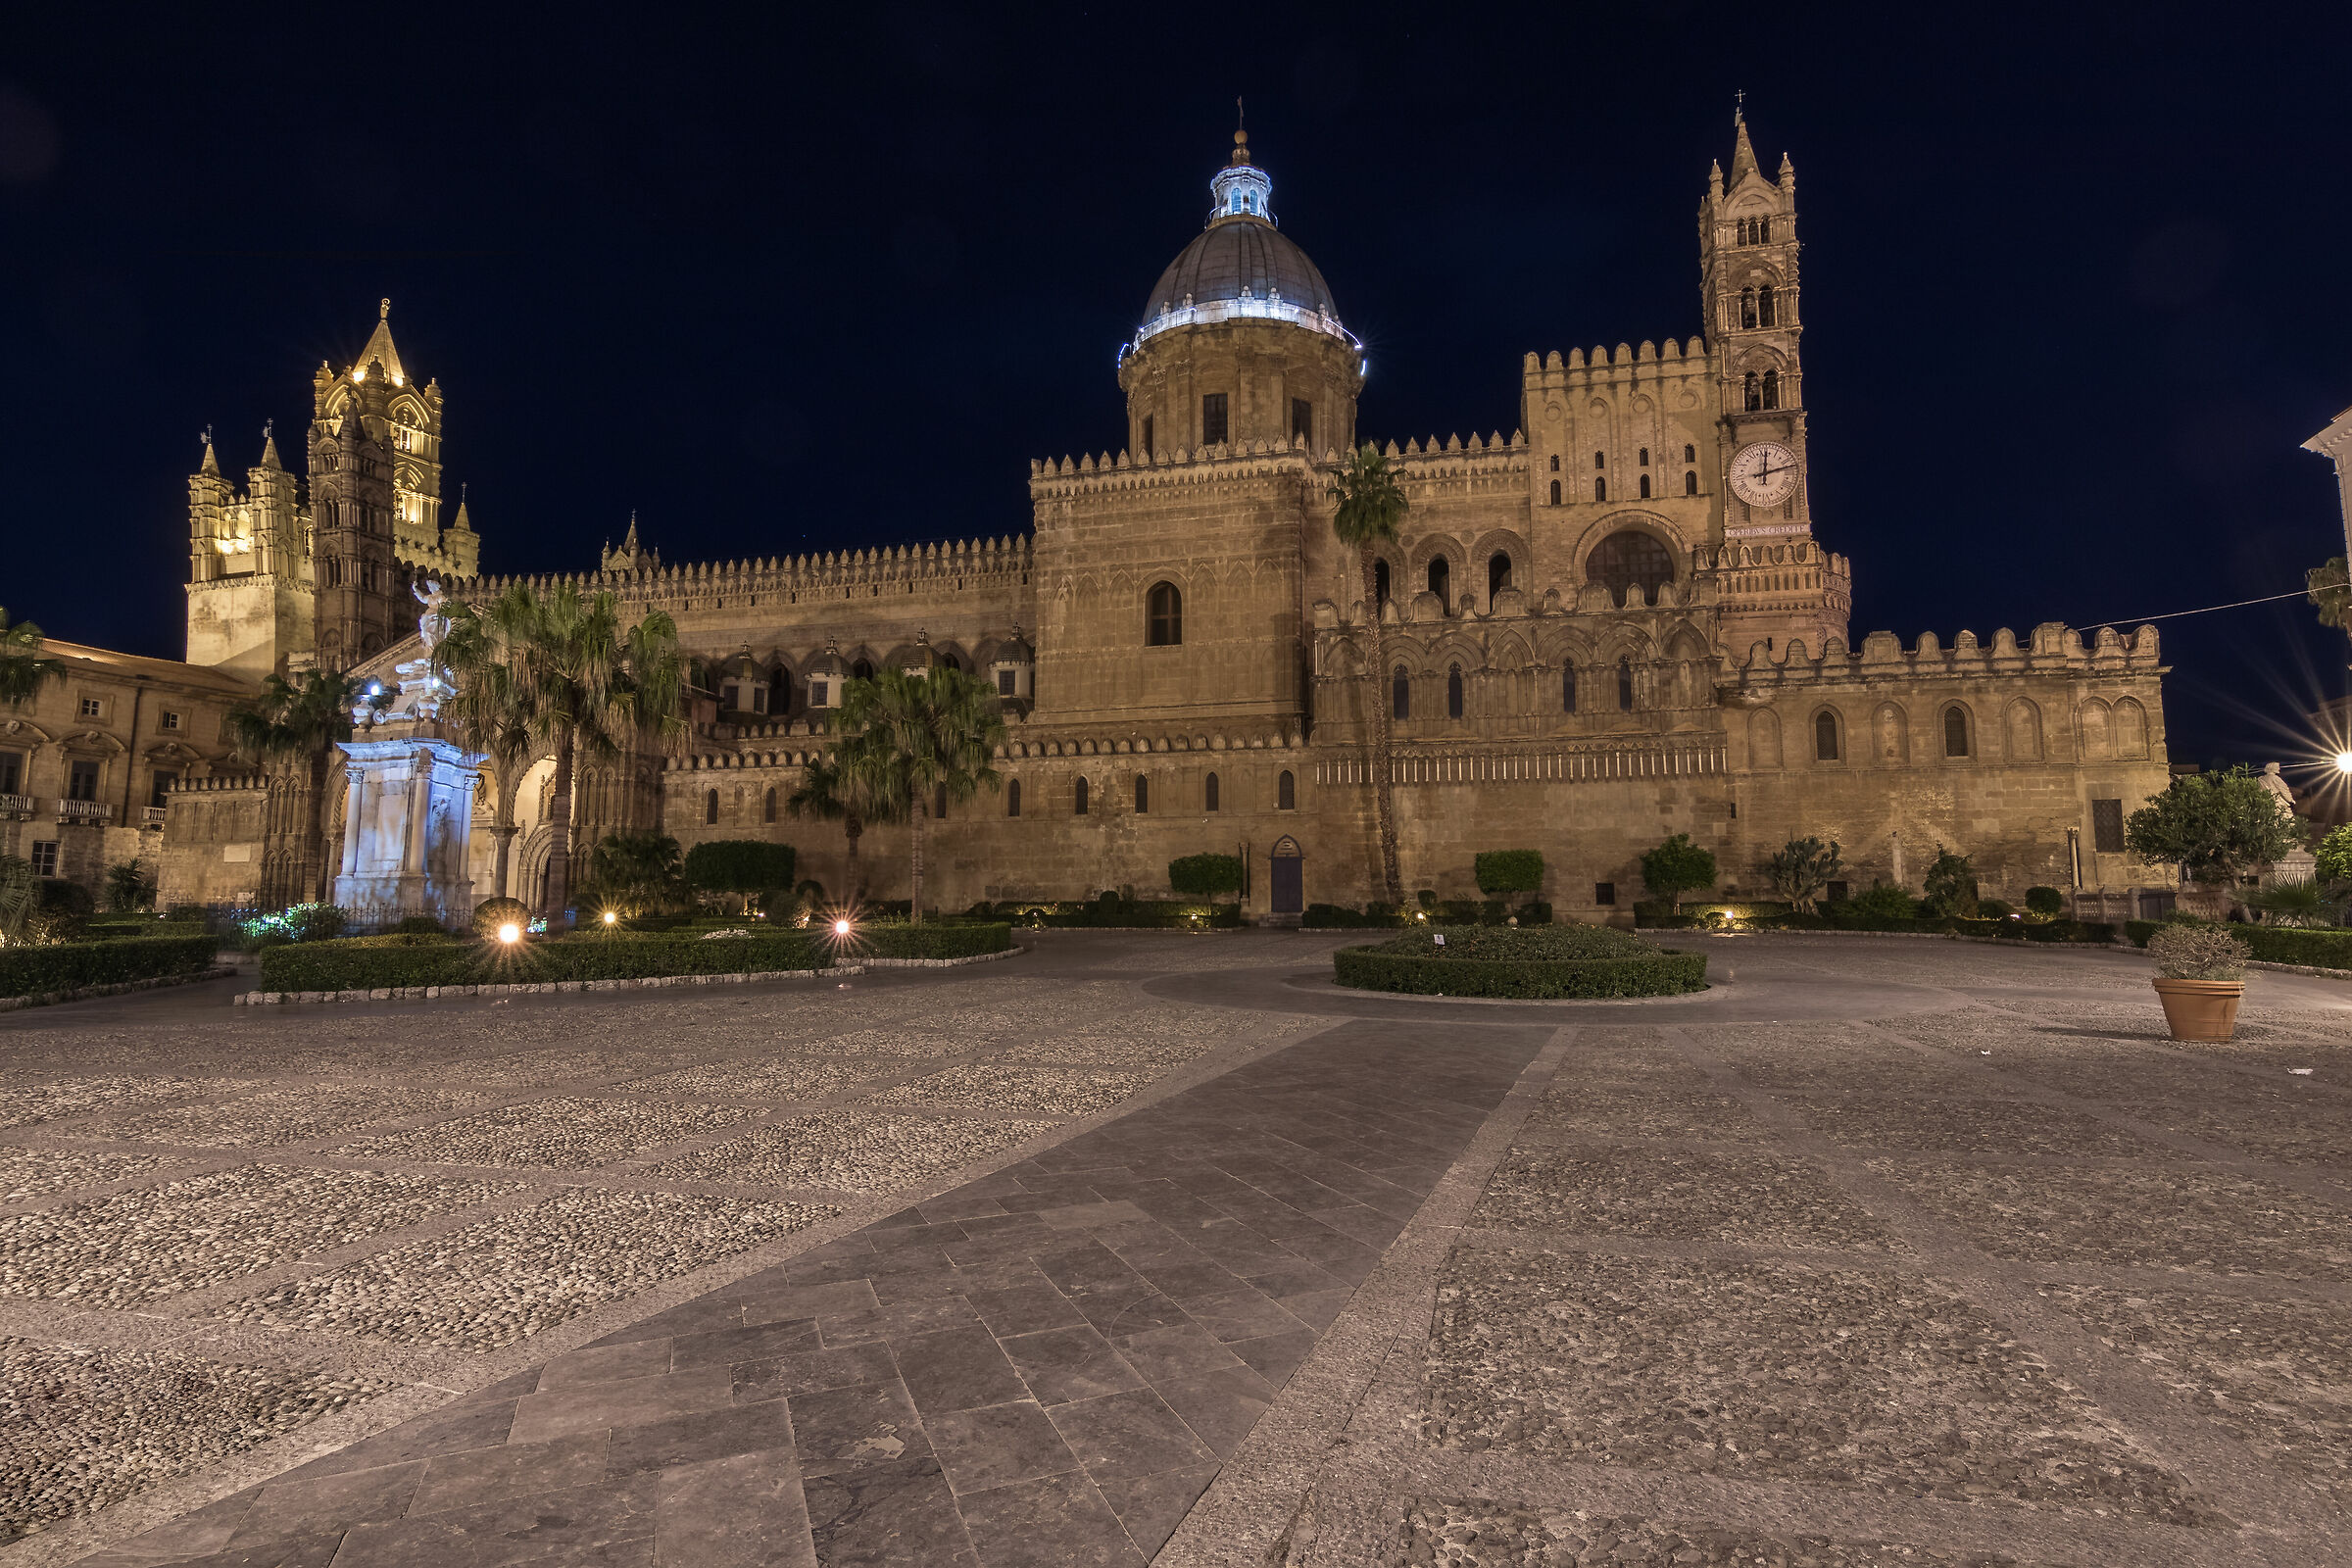 The Cathedral of Palermo at night...